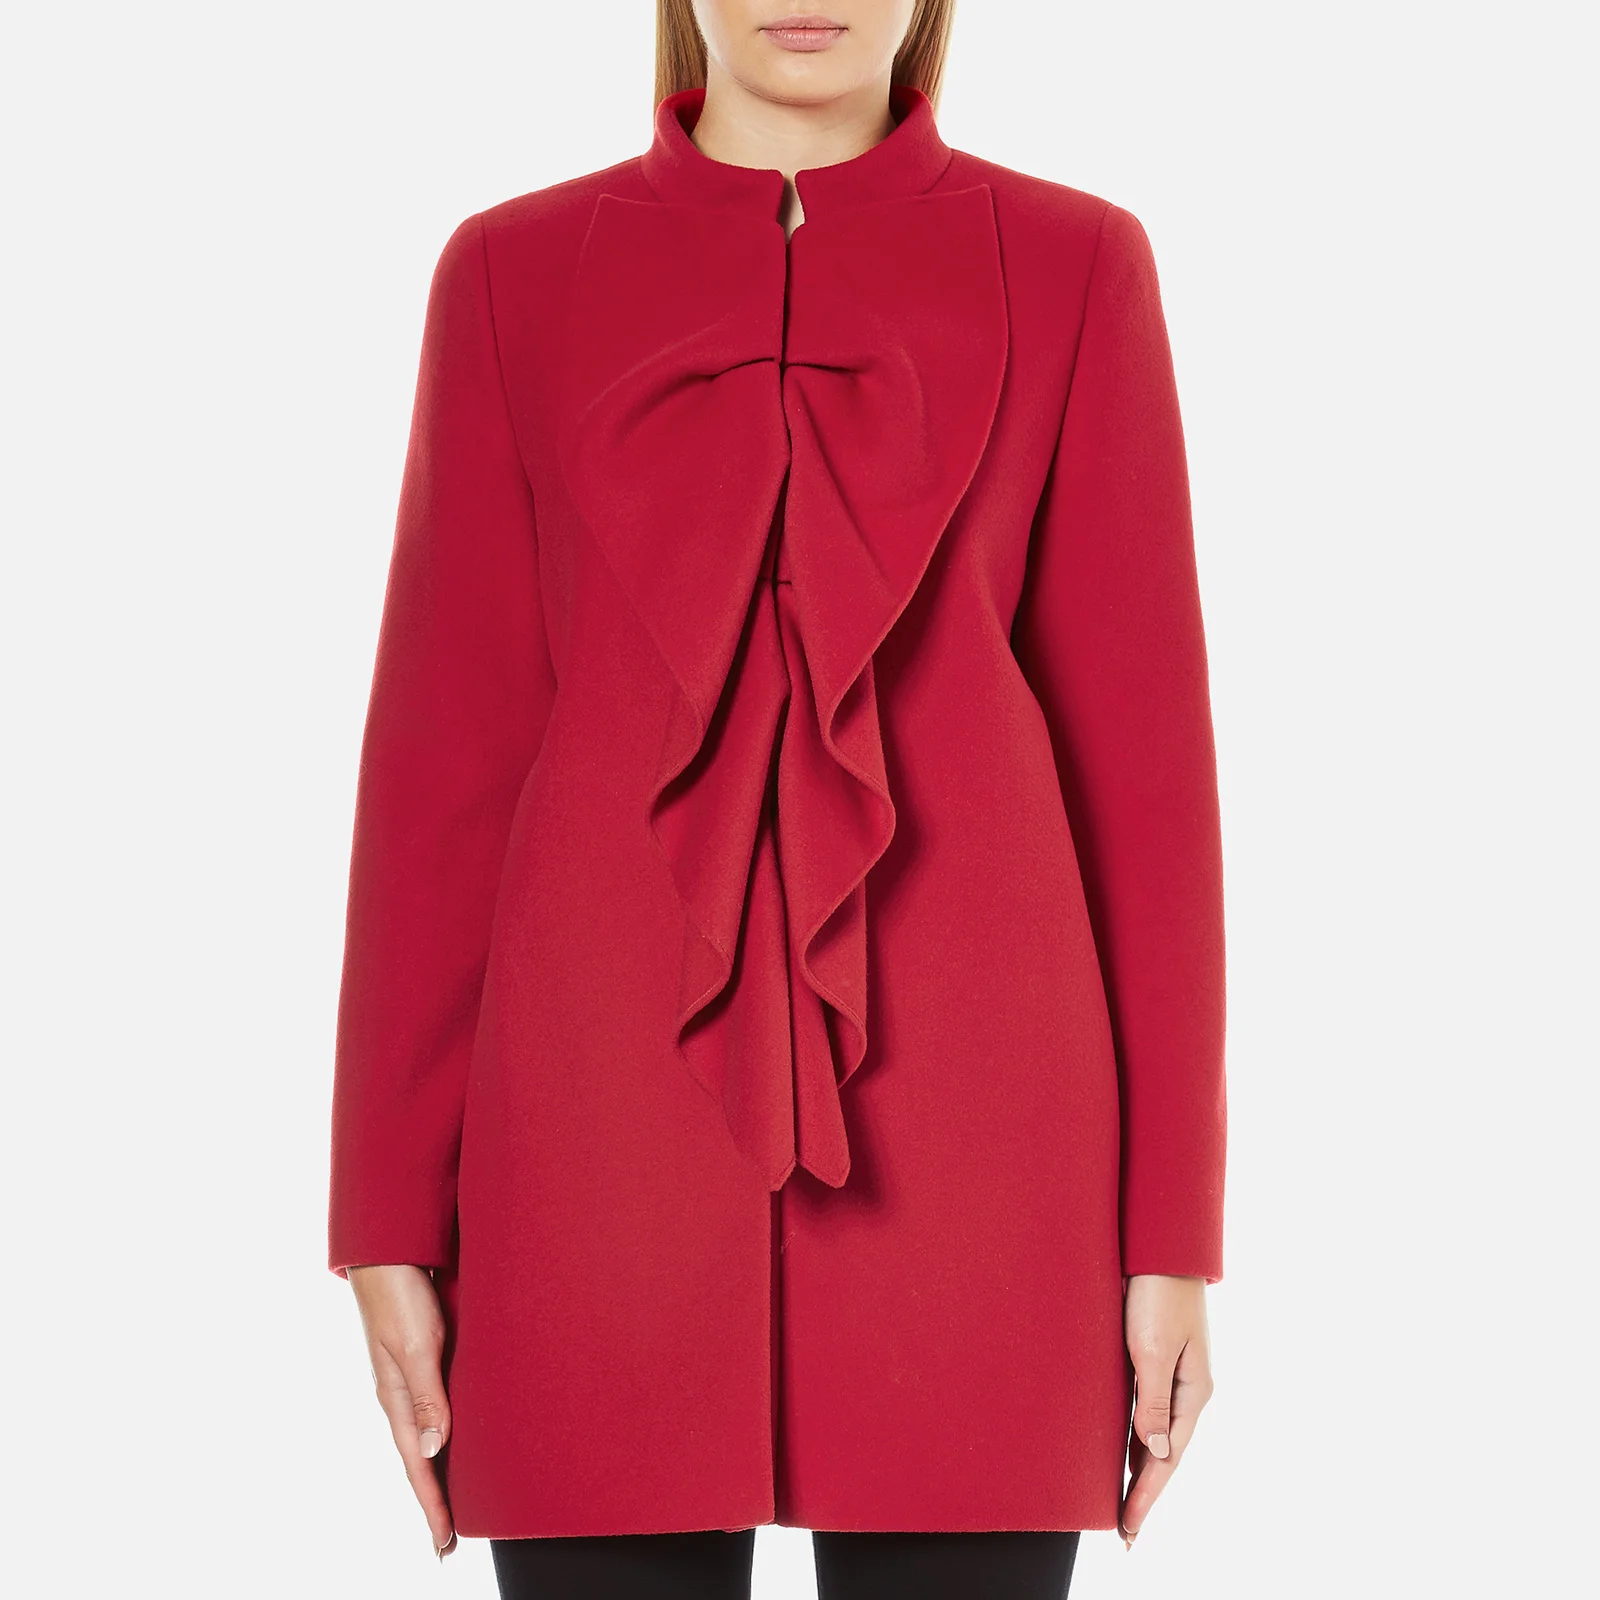 Boutique Moschino Women's Frill Jacket - Red Image 1